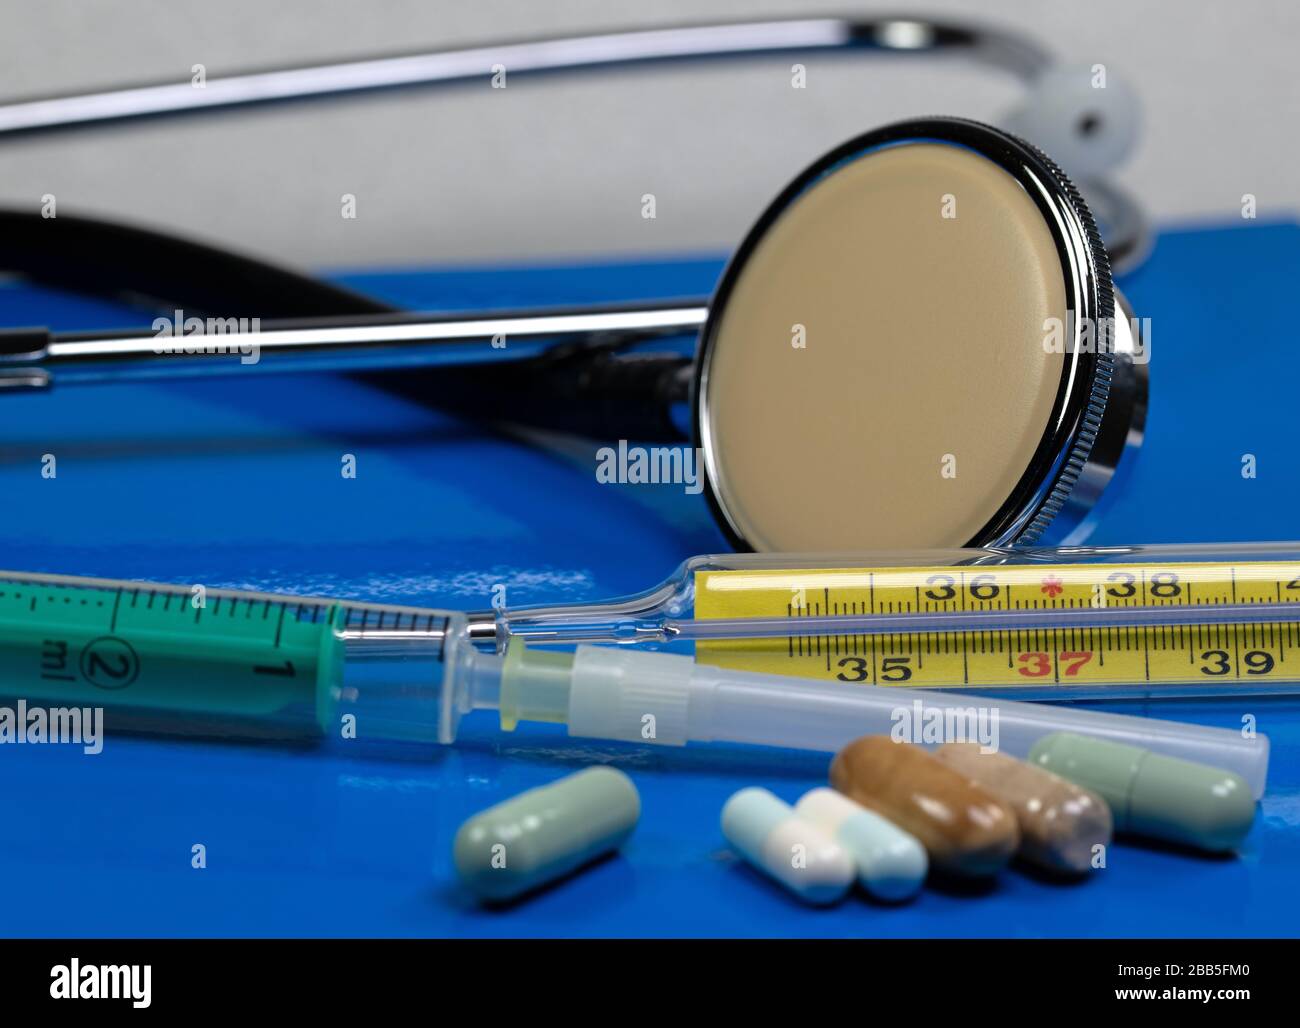 Health care, medication and medical equipment in a close-up Stock Photo